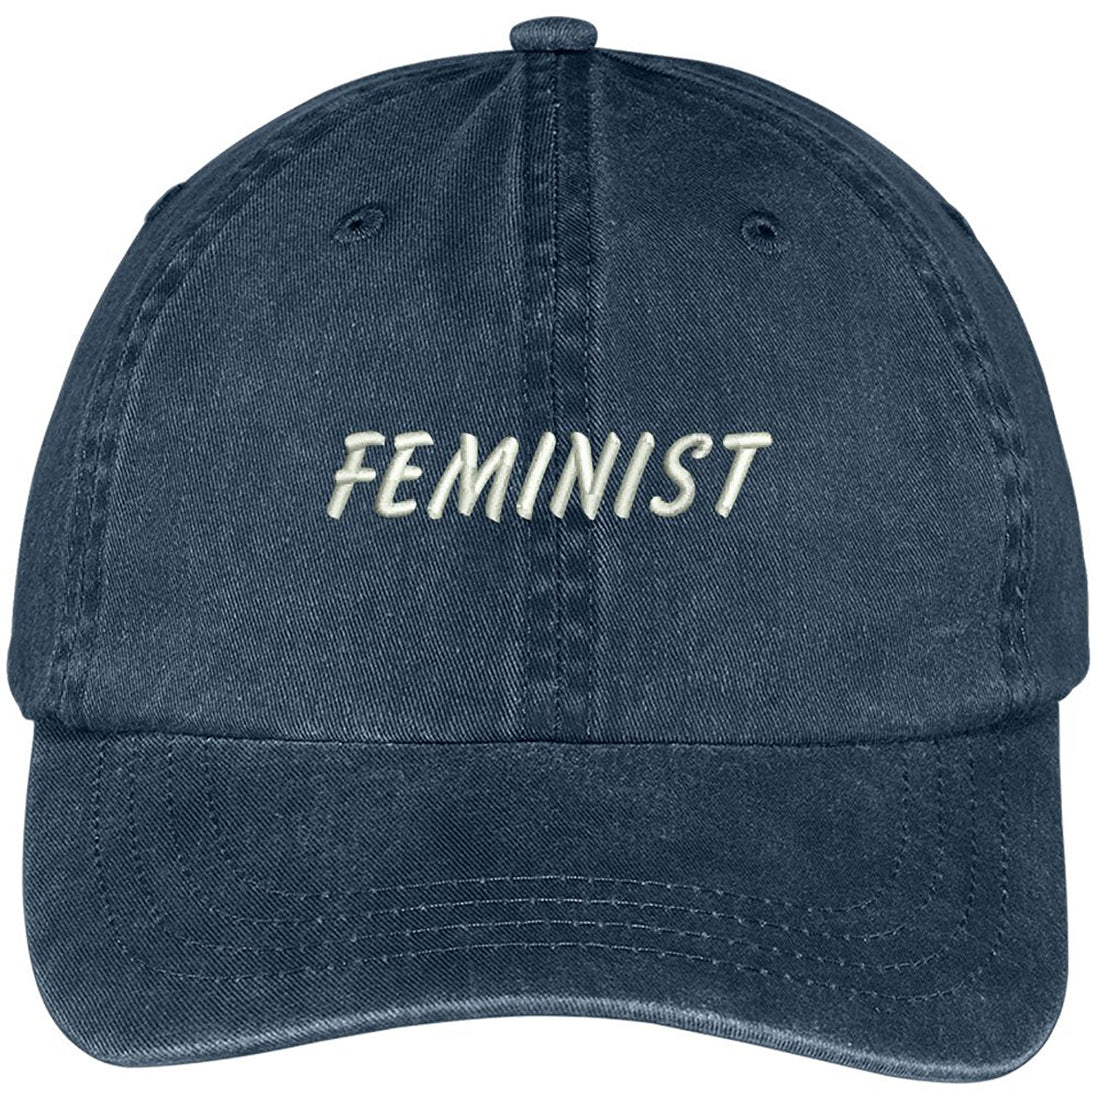 Trendy Apparel Shop Feminist Embroidered Washed Cotton Adjustable Cap